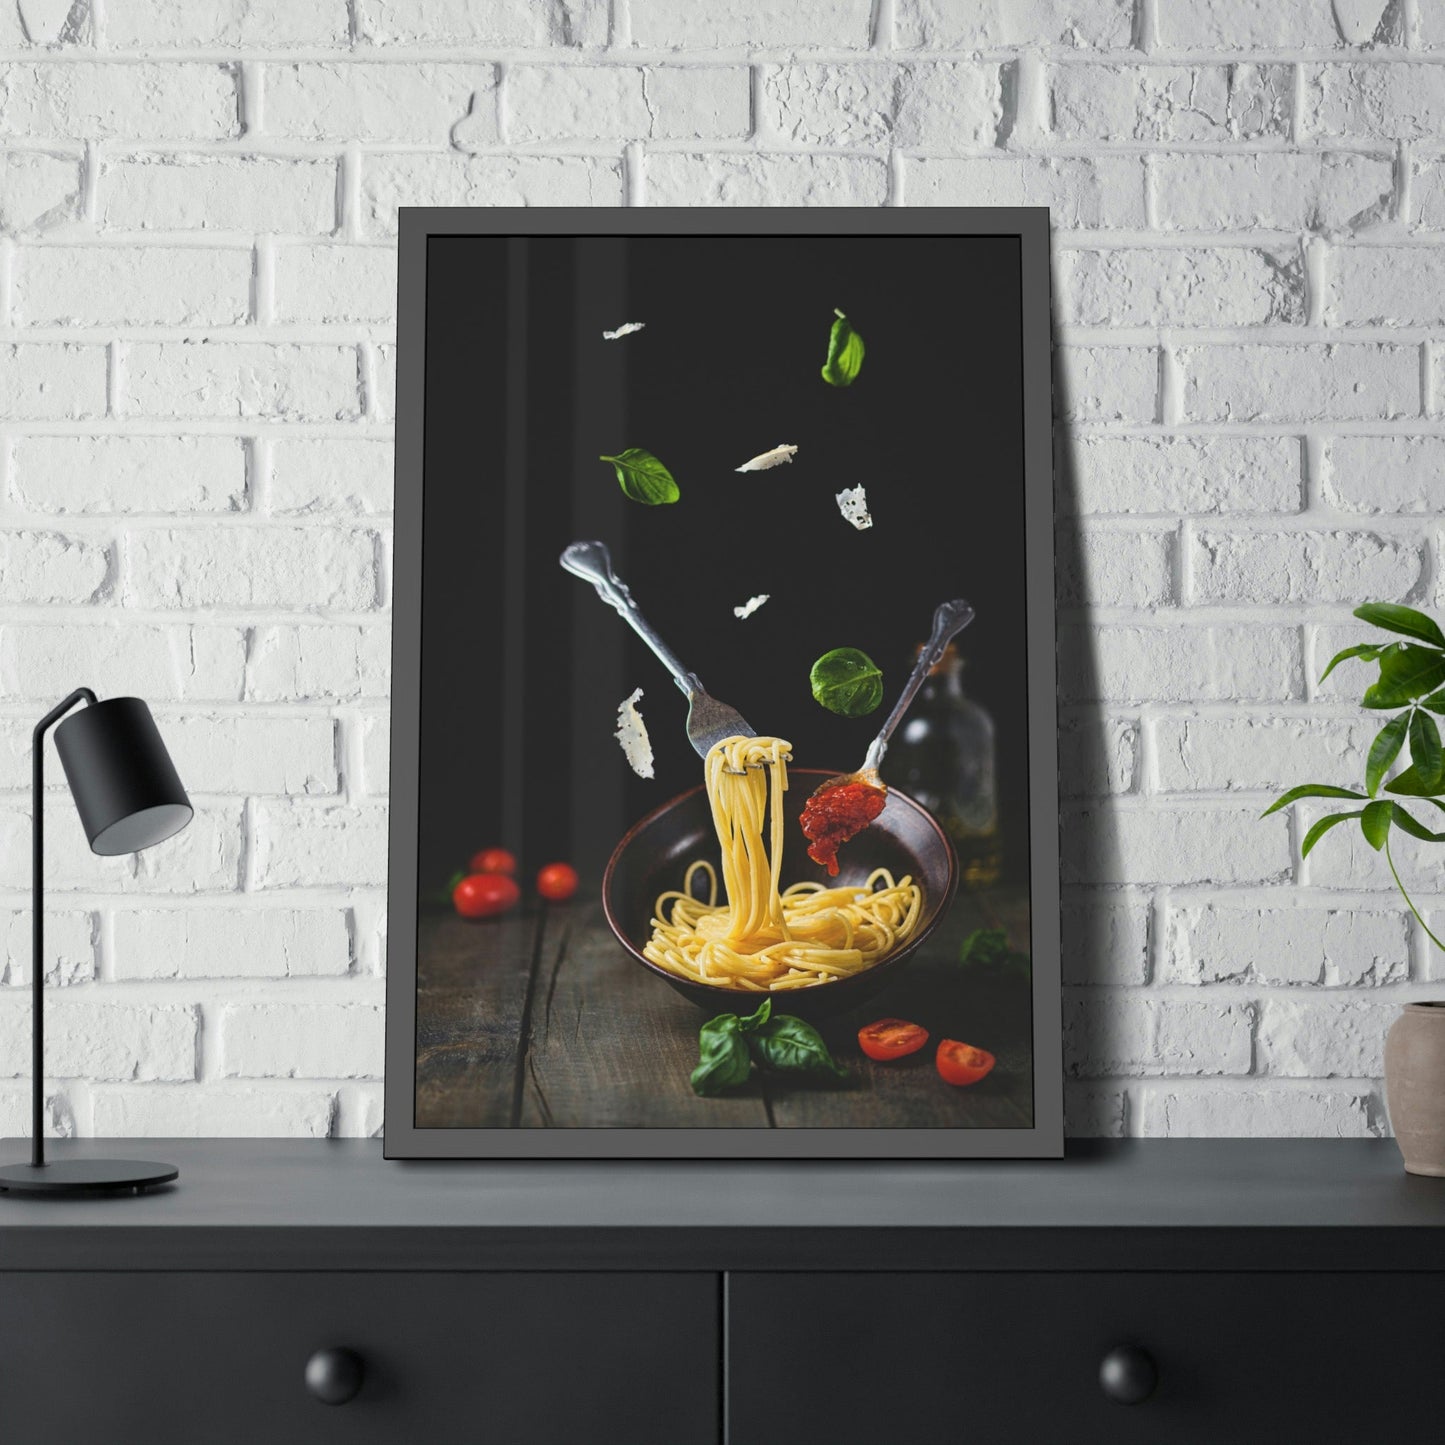 Pasta Passion: Artistic Framed Canvas Prints for Your Kitchen